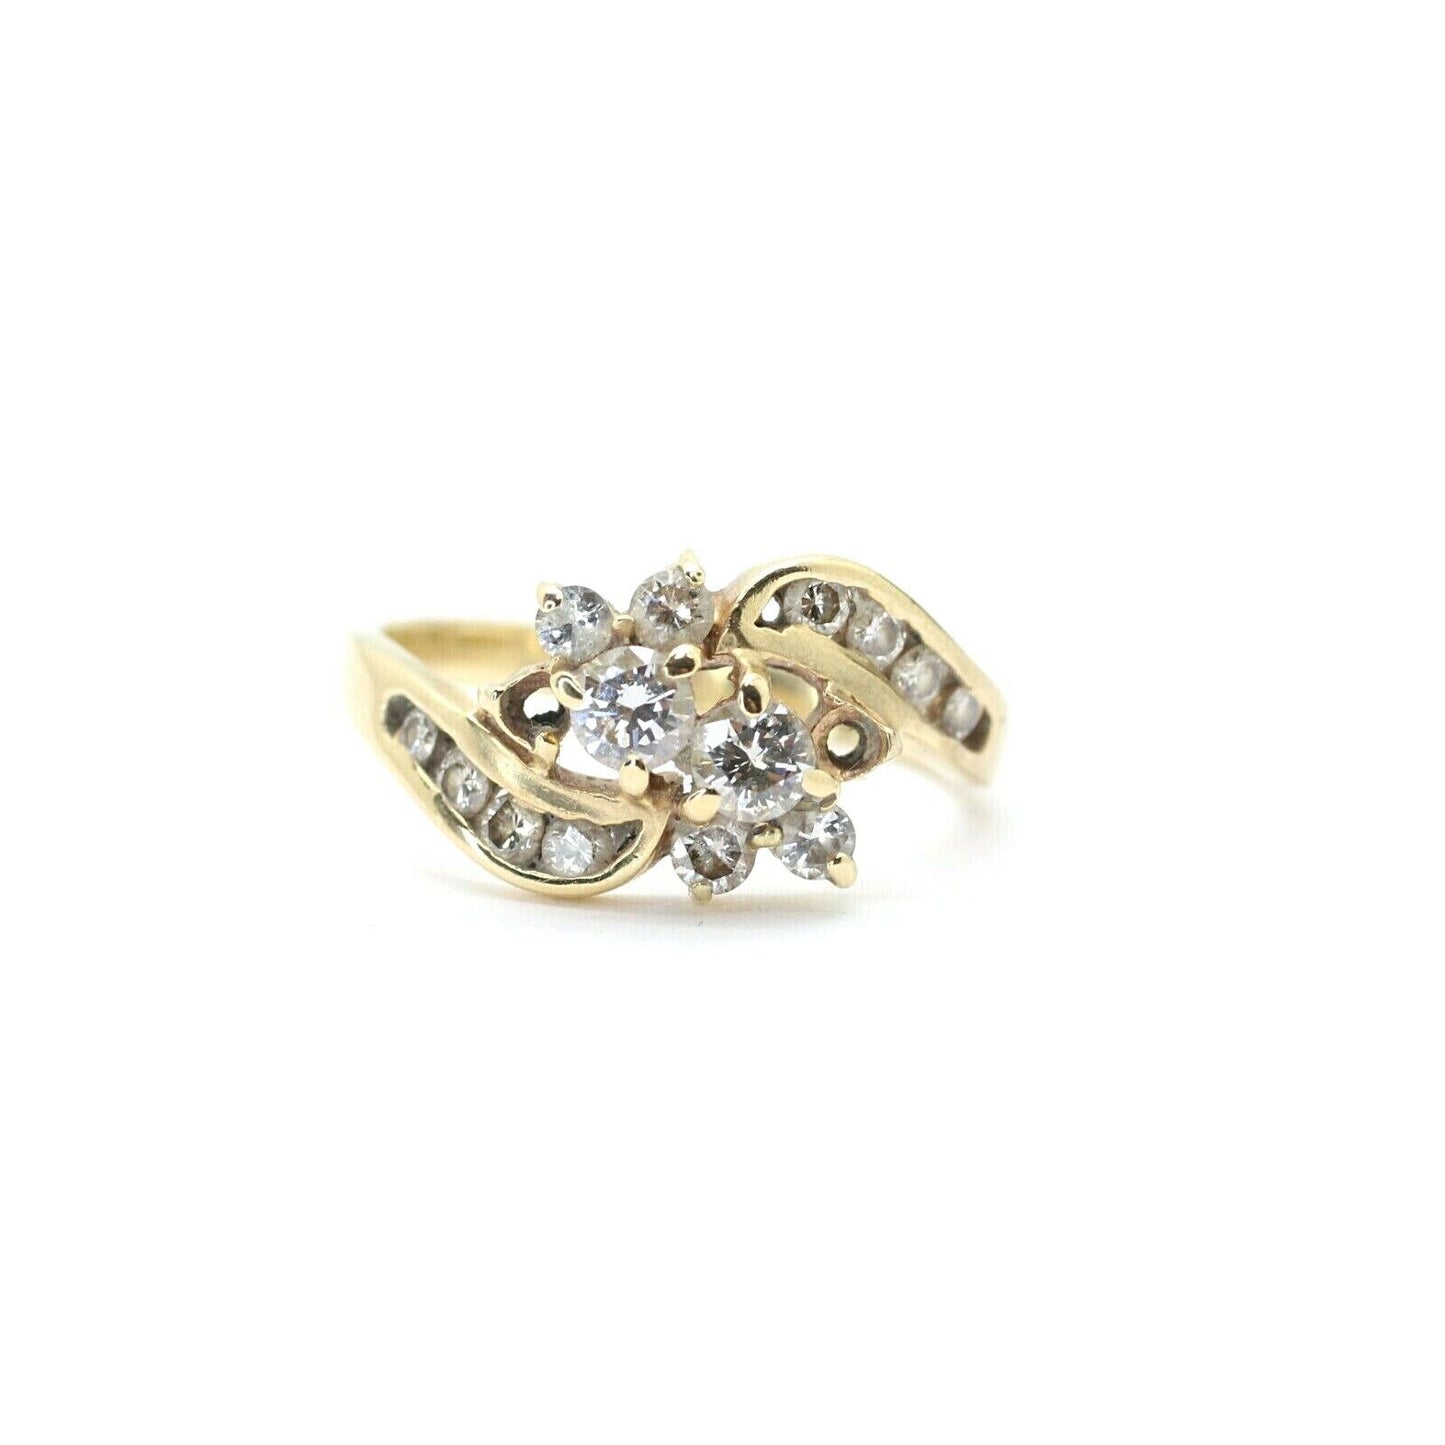 Vintage Round Diamonds Cluster Ring in 14k Yellow Gold 8us